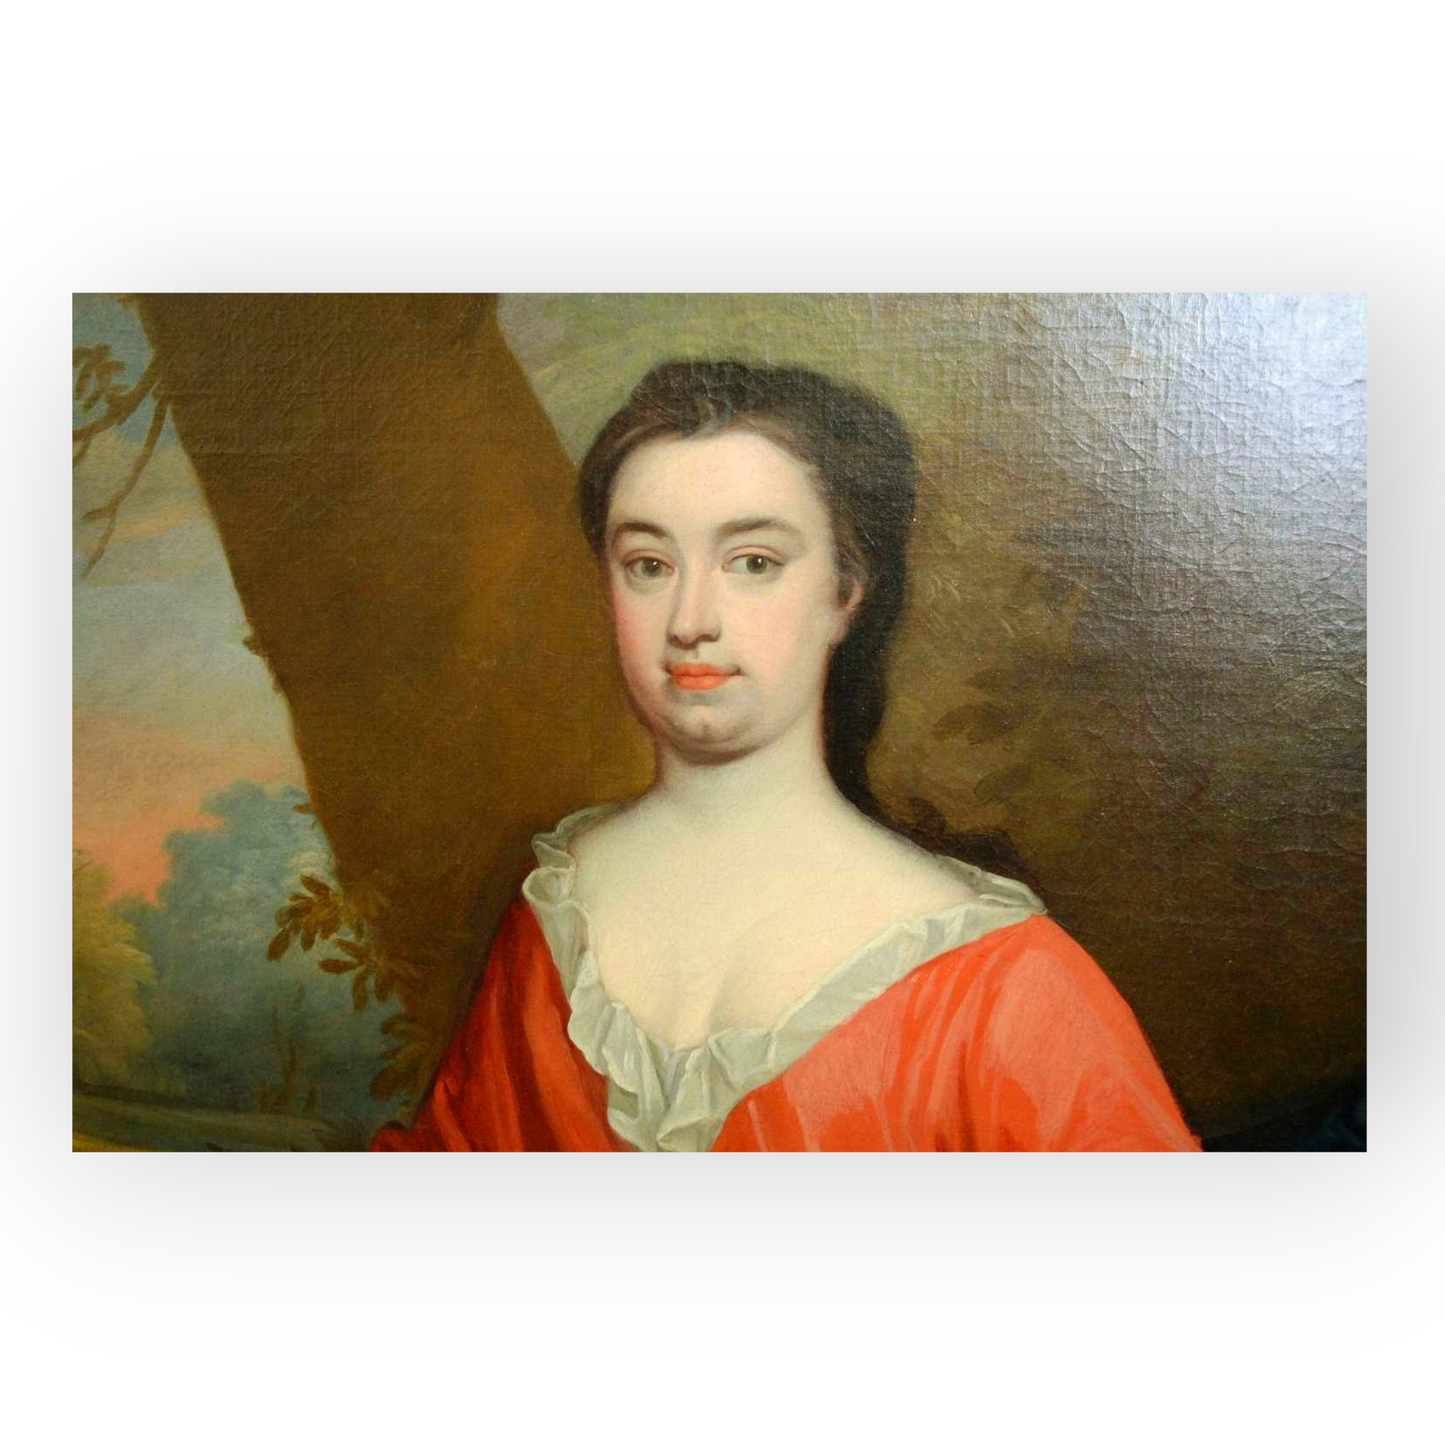 Follower of Michael Dahl (1659–1743) - A Large late 17th Century English School Antique Oil On Canvas Portrait Of An Aristocratic Lady Gesturing Towards A Red Squirrel